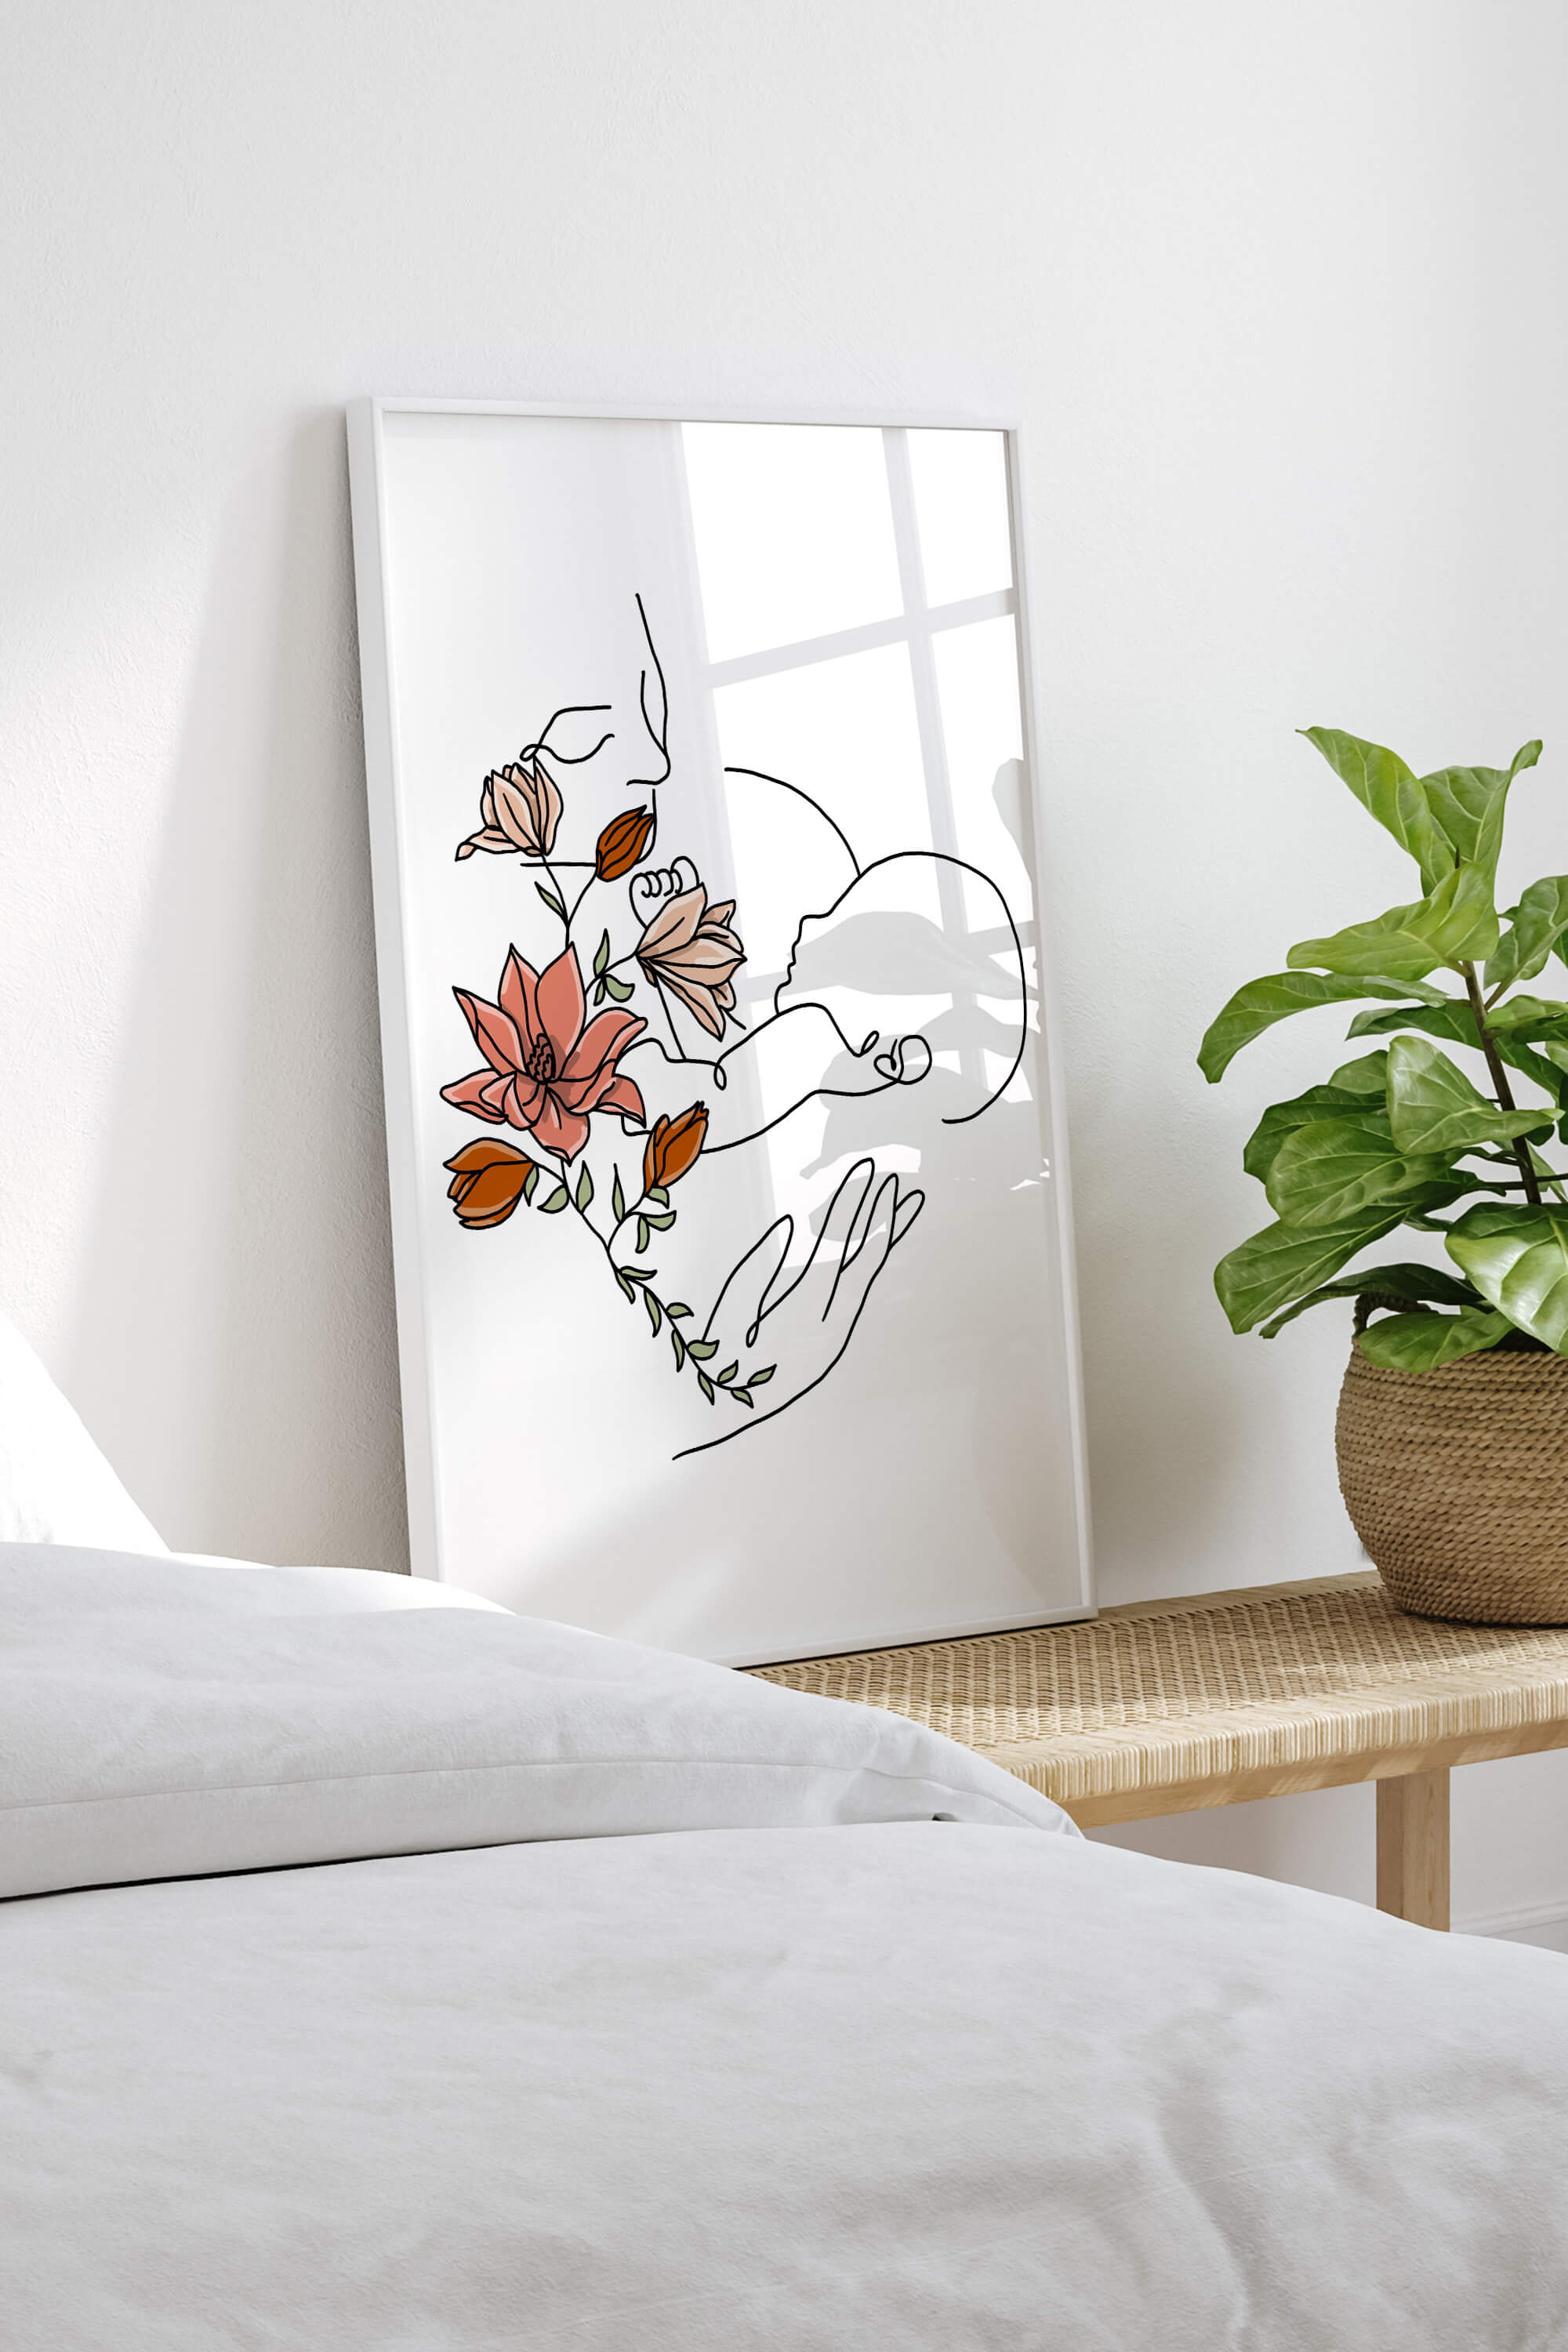 Embrace the radiance of motherhood with this captivating wall art. Joyful and graceful, it narrates the story of the extraordinary journey. Celebrate cultural diversity through the radiance of motherhood.